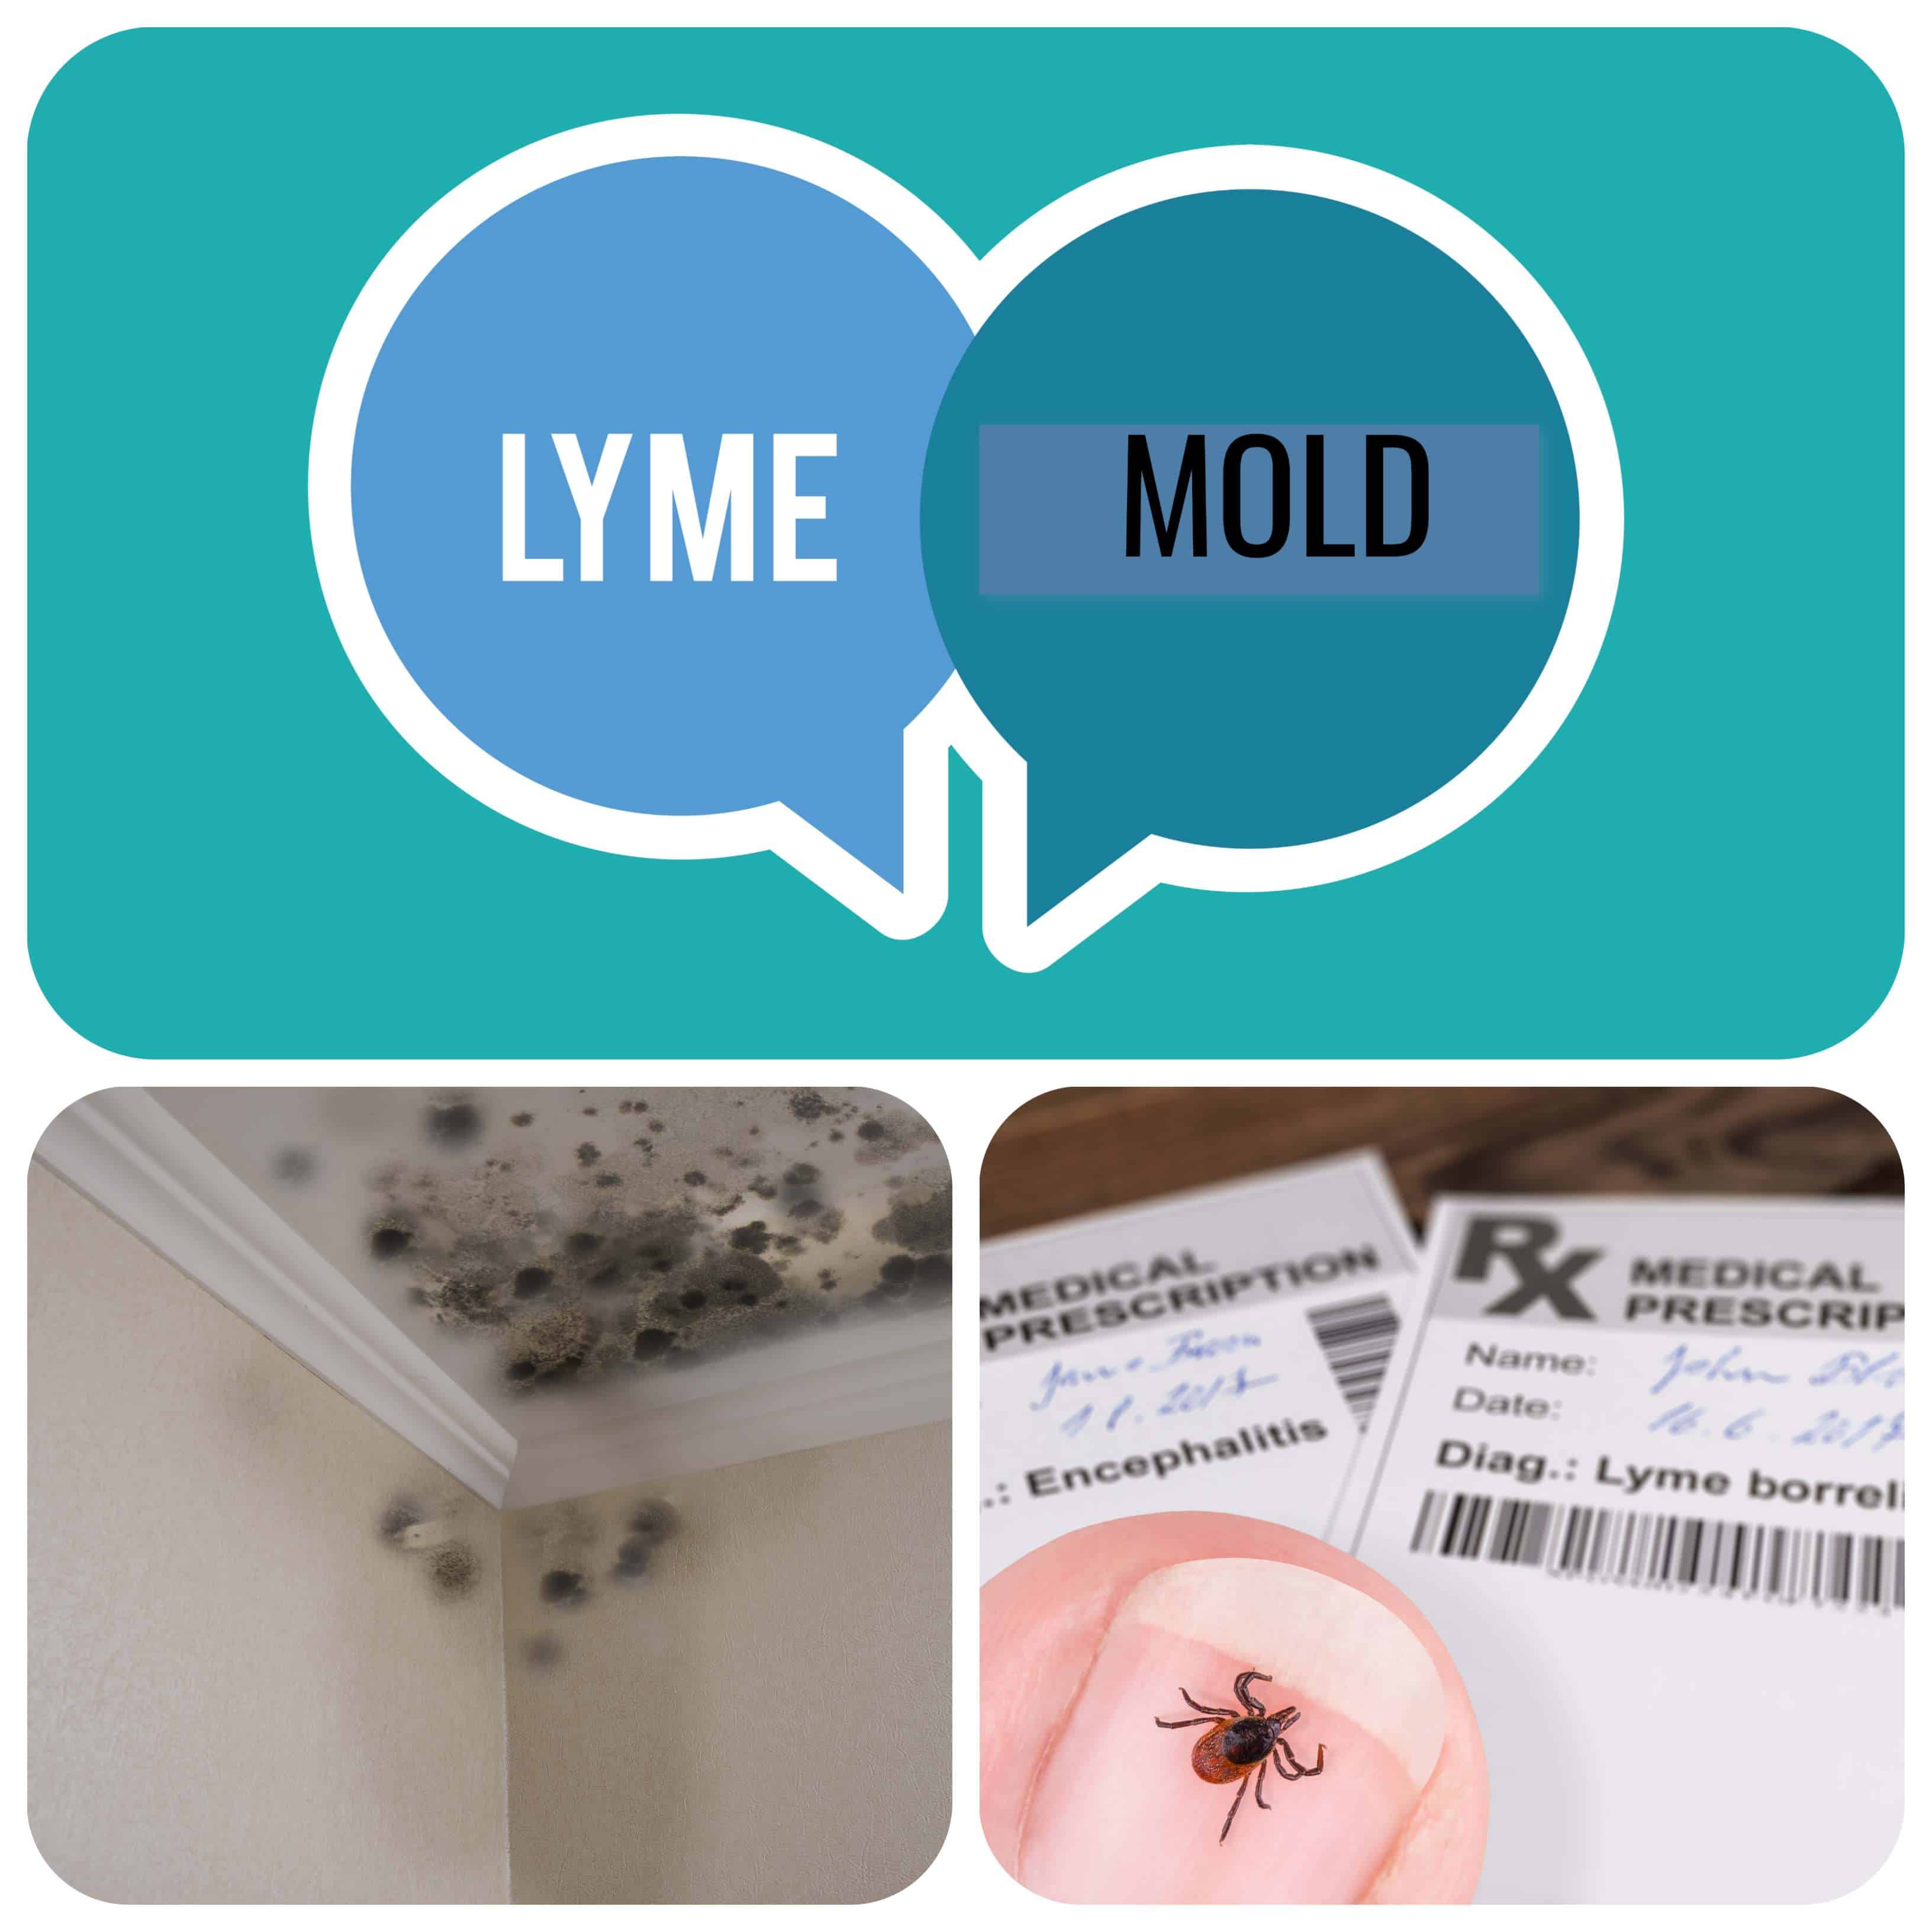 Test For Black Mold: Your Health May Depend On It - My Lyme Doc